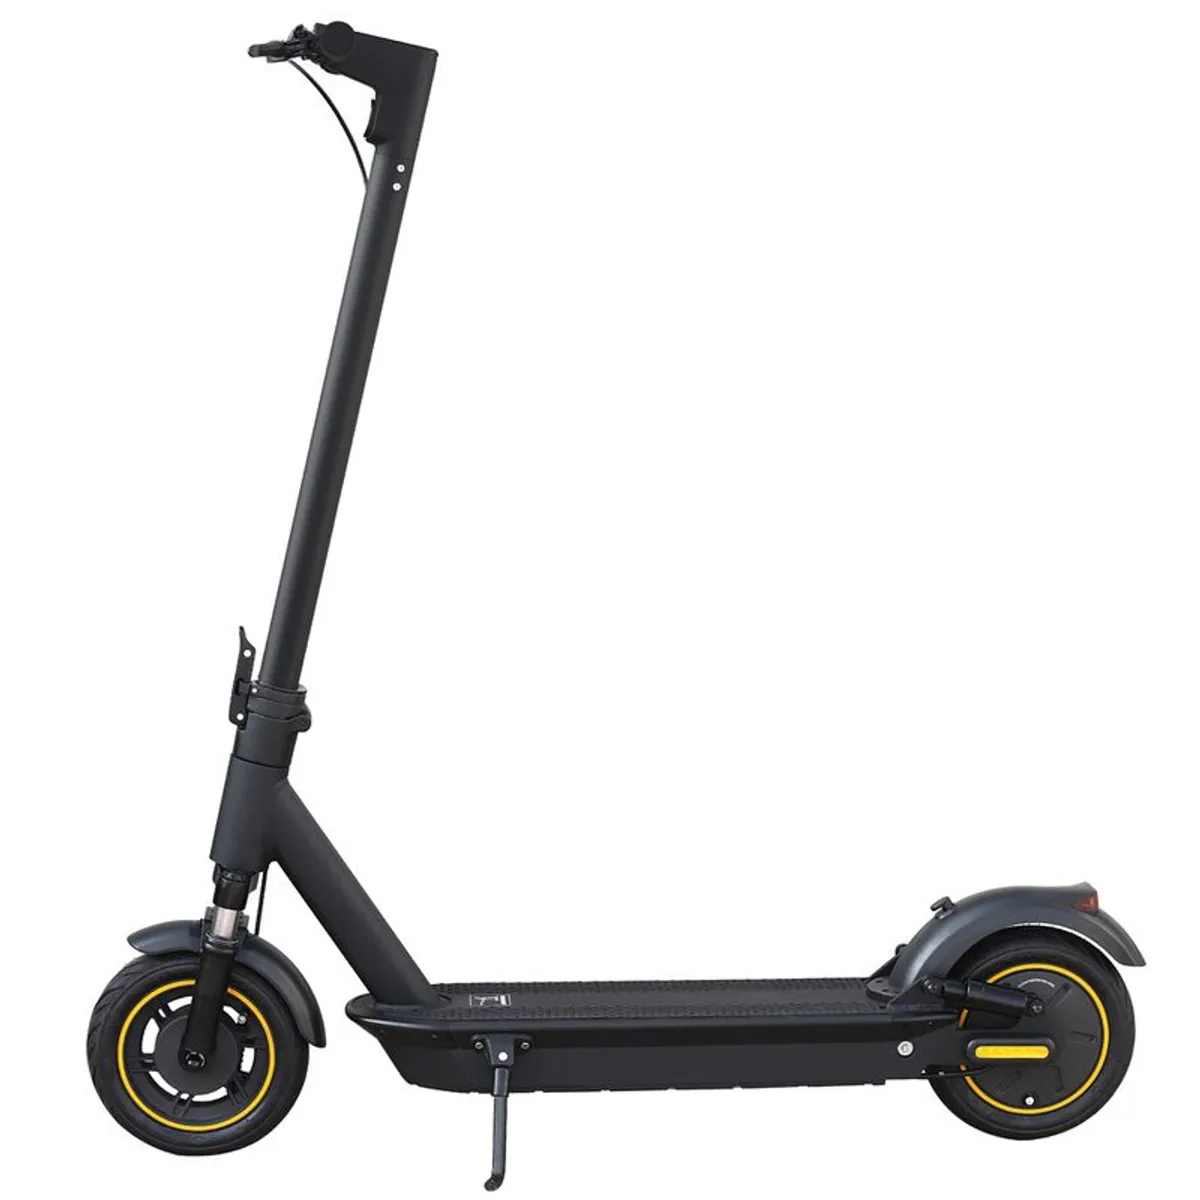 Aovopro Esmax 500w Electric Scooter